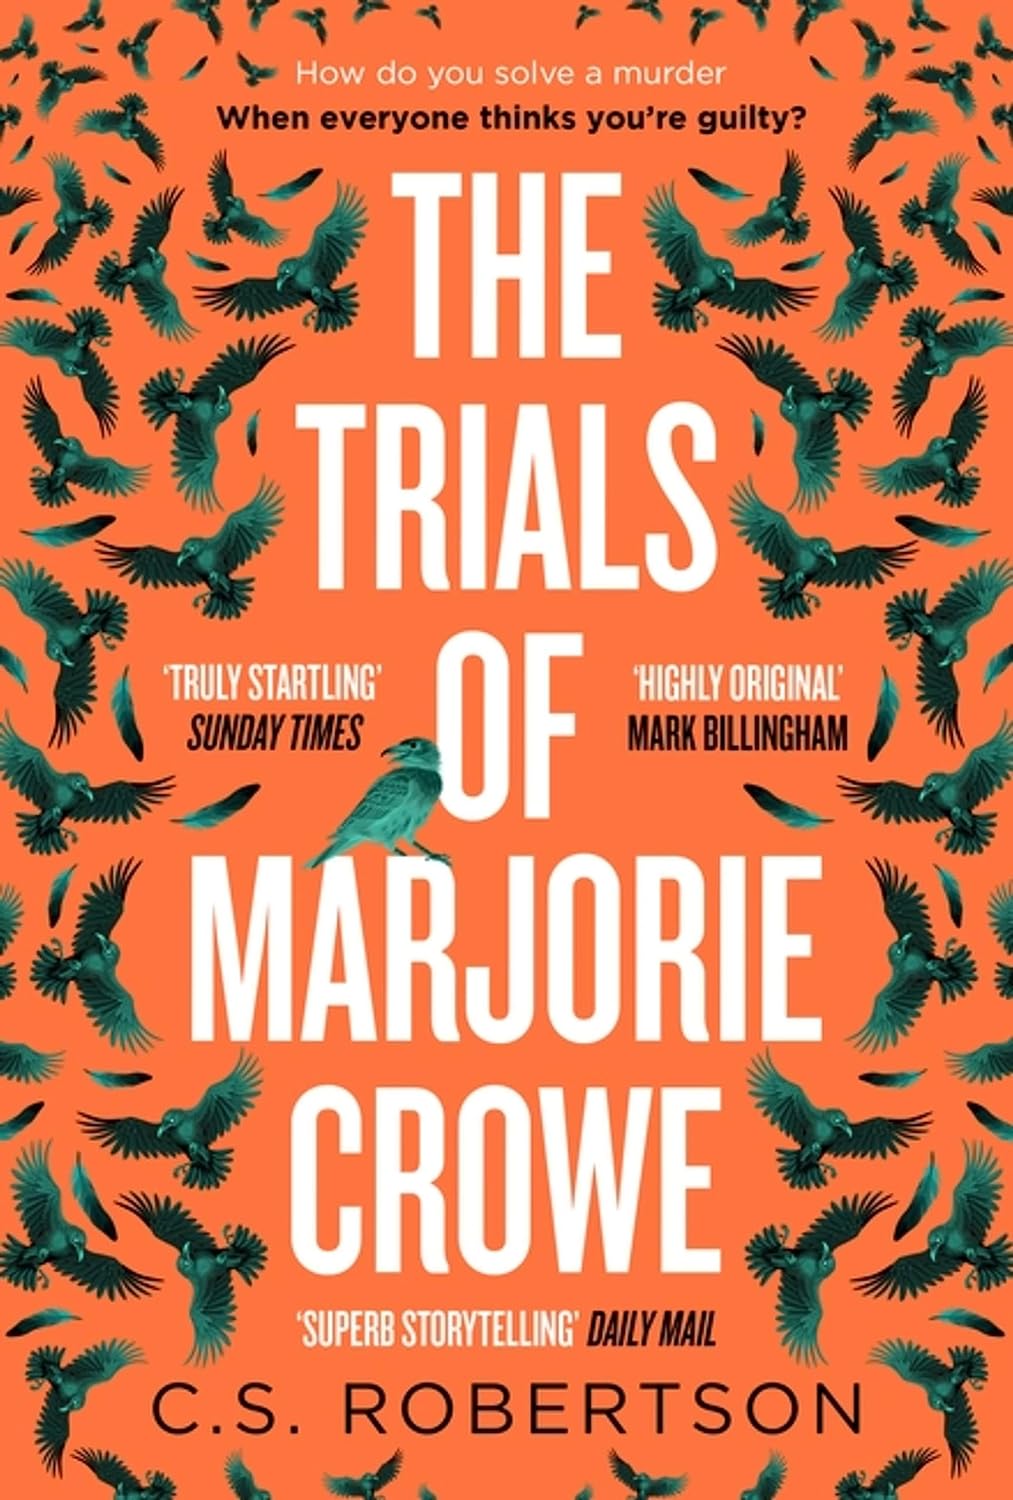 The_Trials_of_Marjorie_Crowe_book_cover.